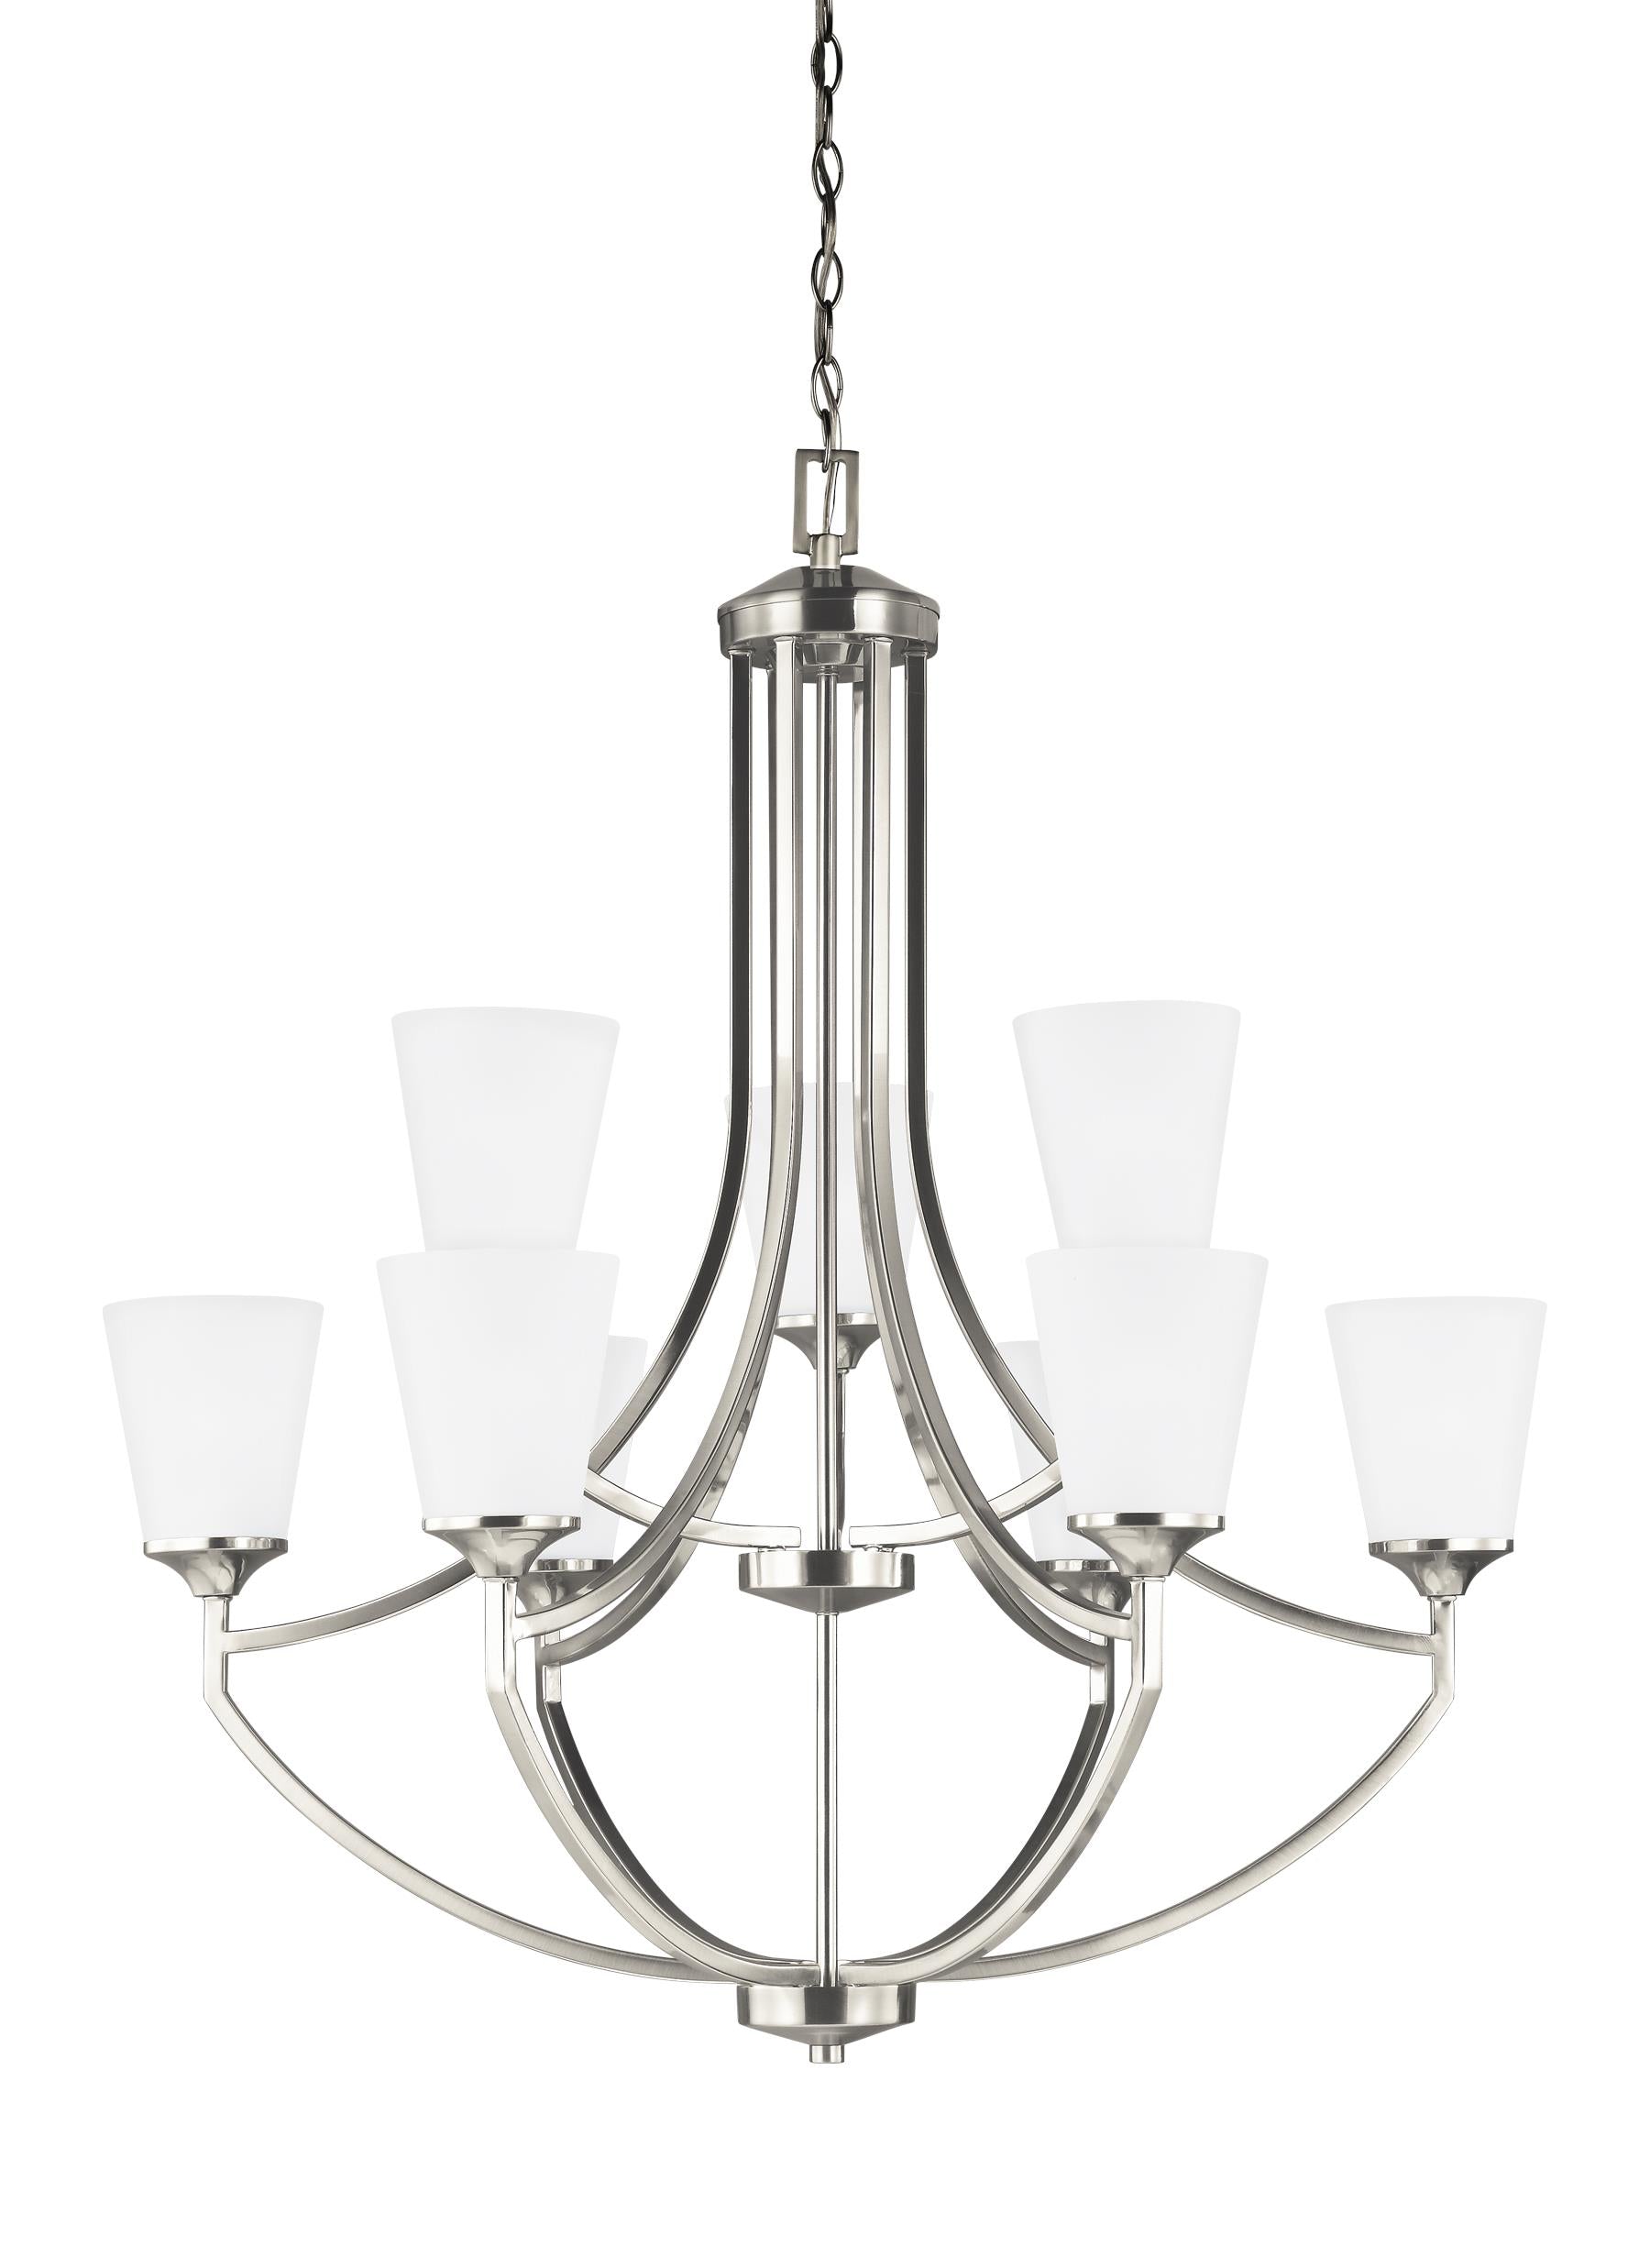 Hanford traditional 9-light indoor dimmable ceiling chandelier pendant light in brushed nickel silver finish with satin et...